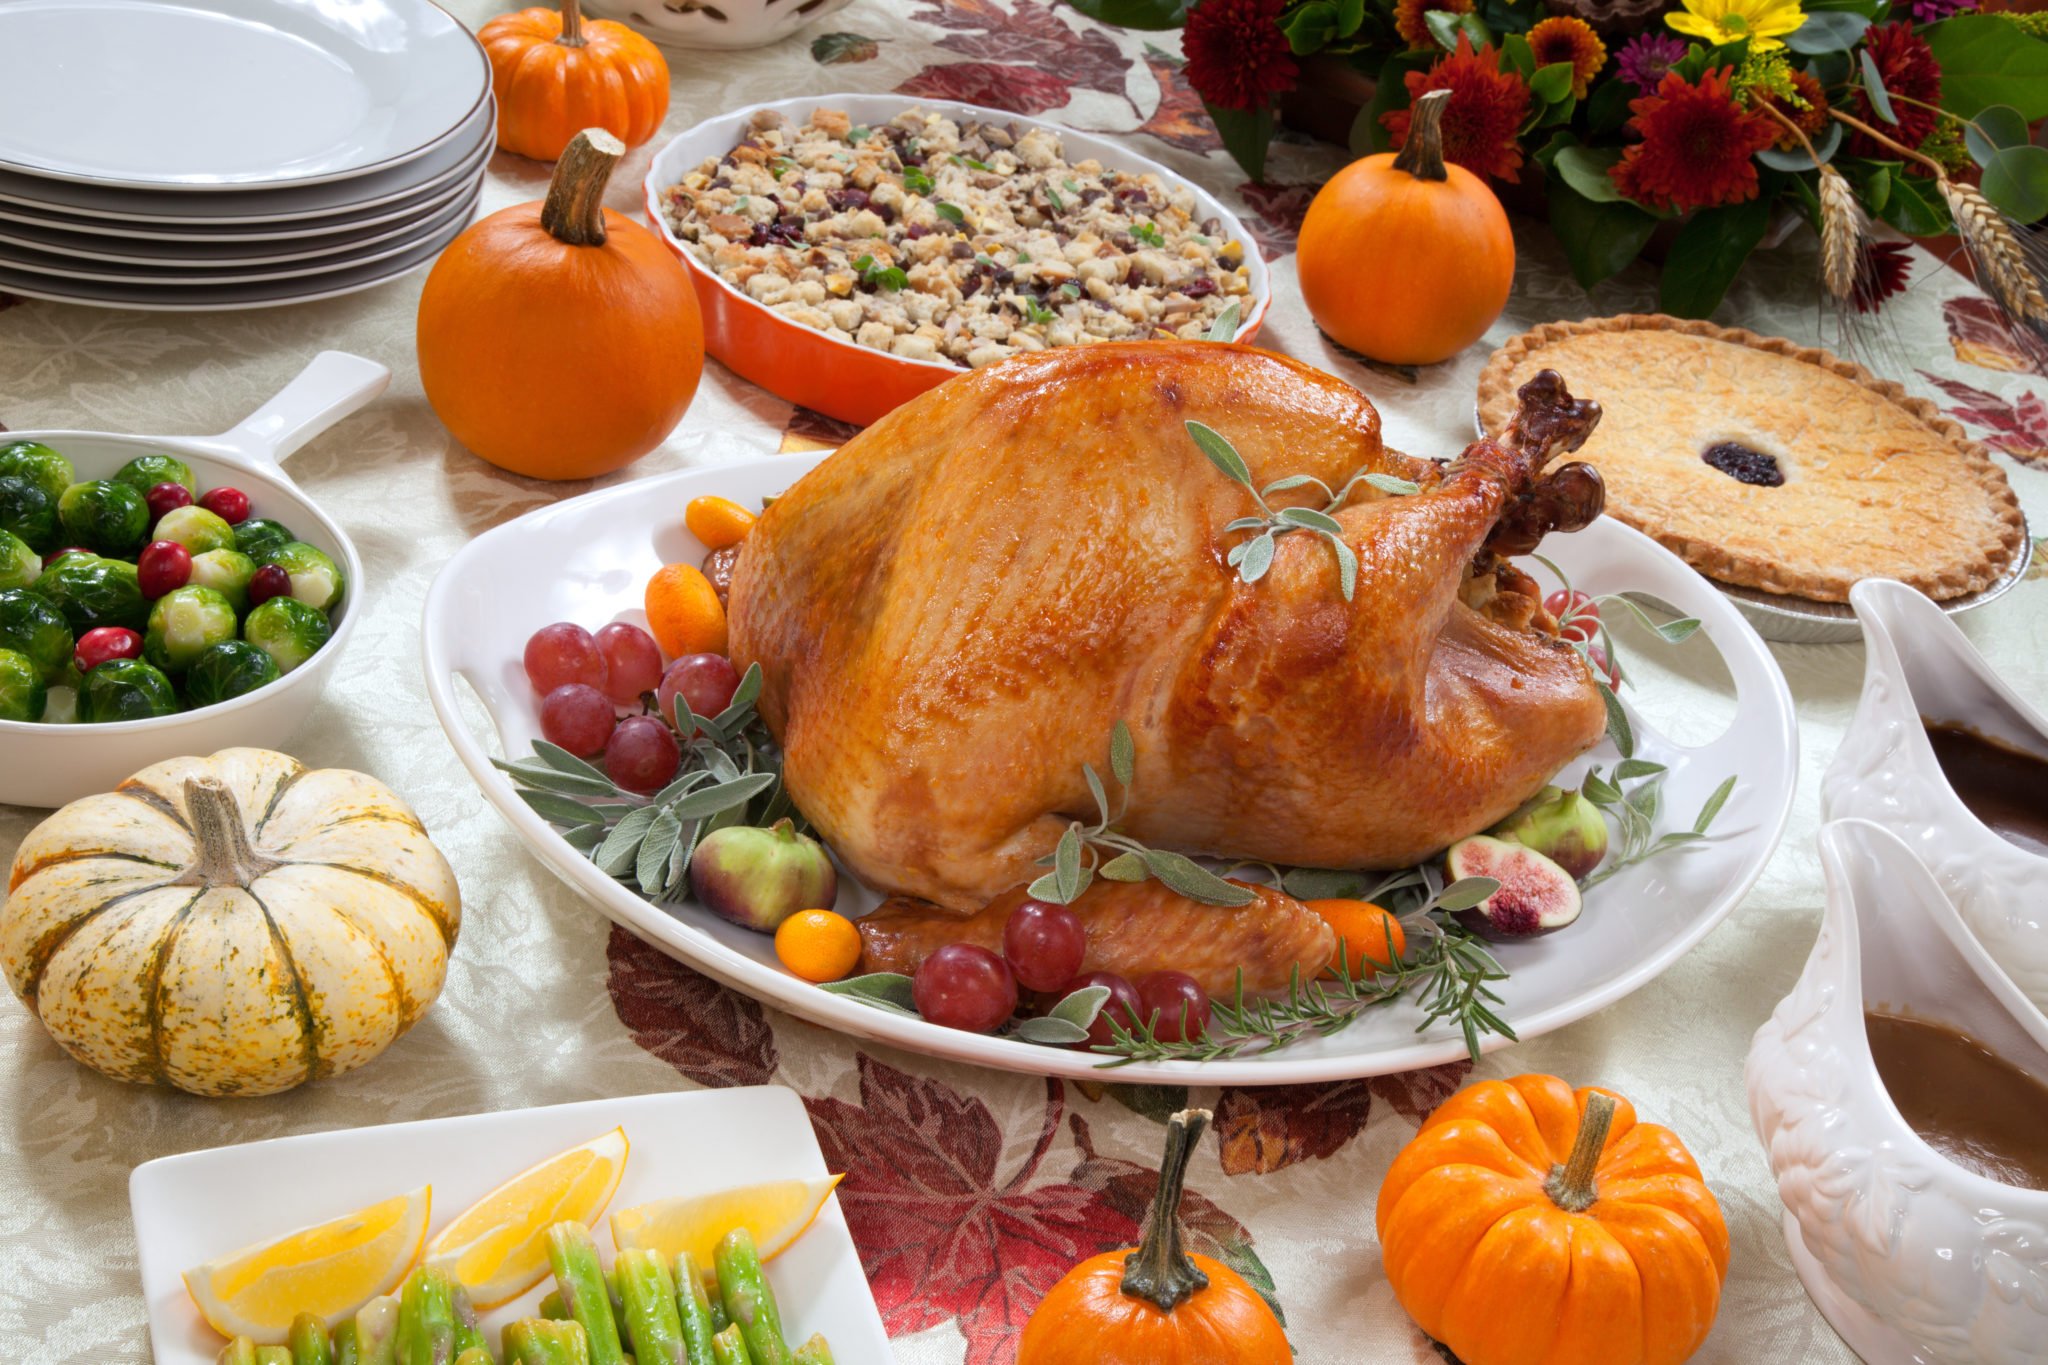 Where can you celebrate Thanksgiving 2022 in Germany? The Local